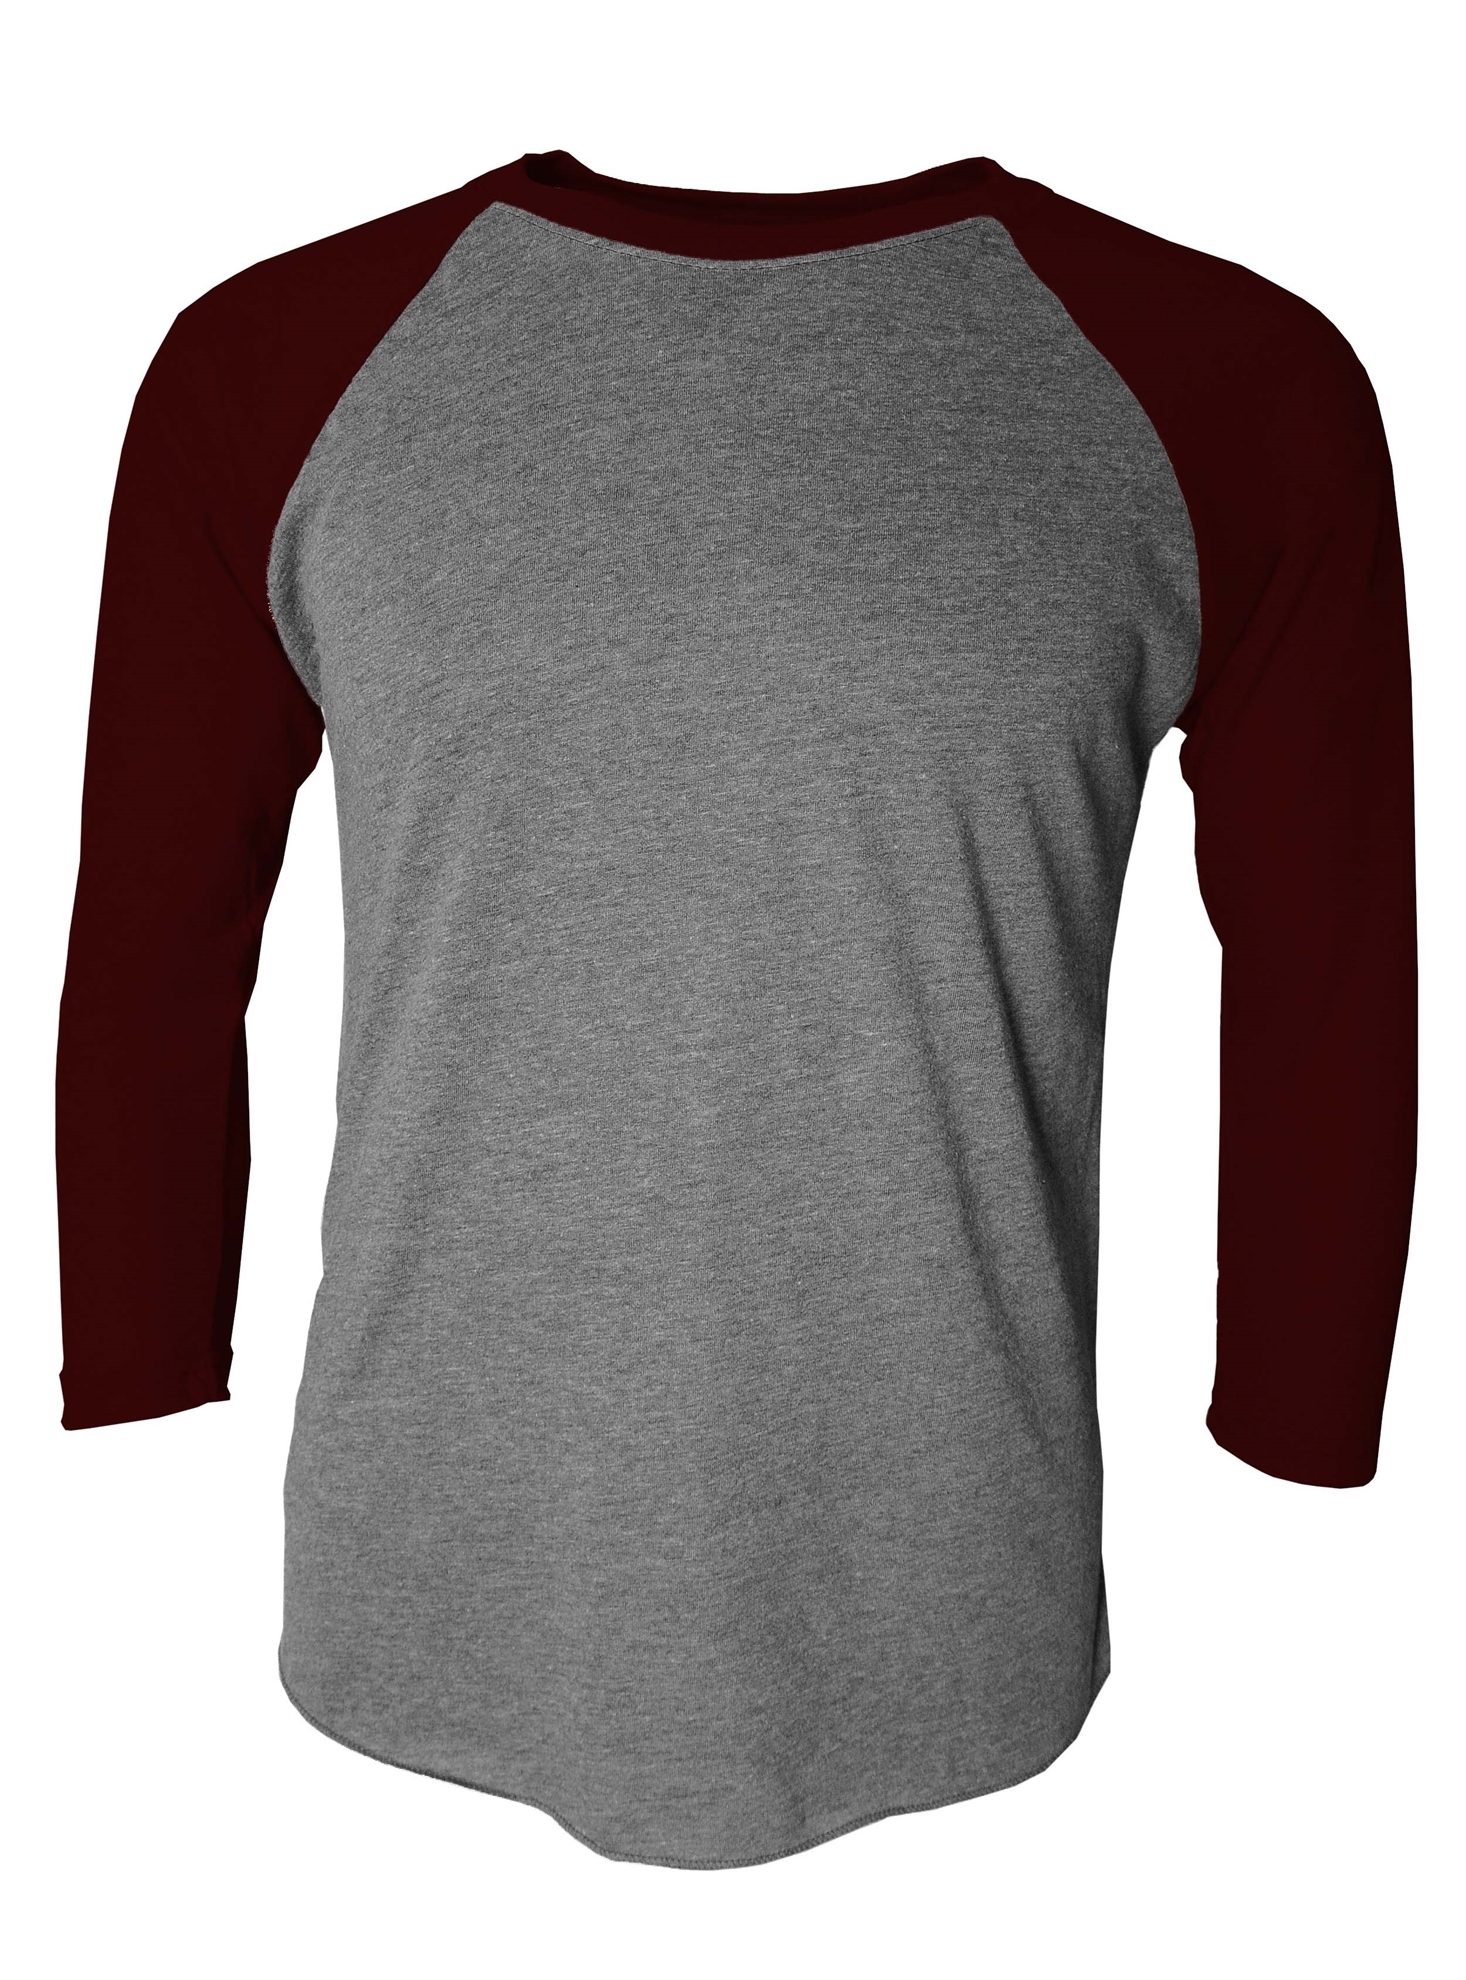 click to view SPORTS GREY/MAROON